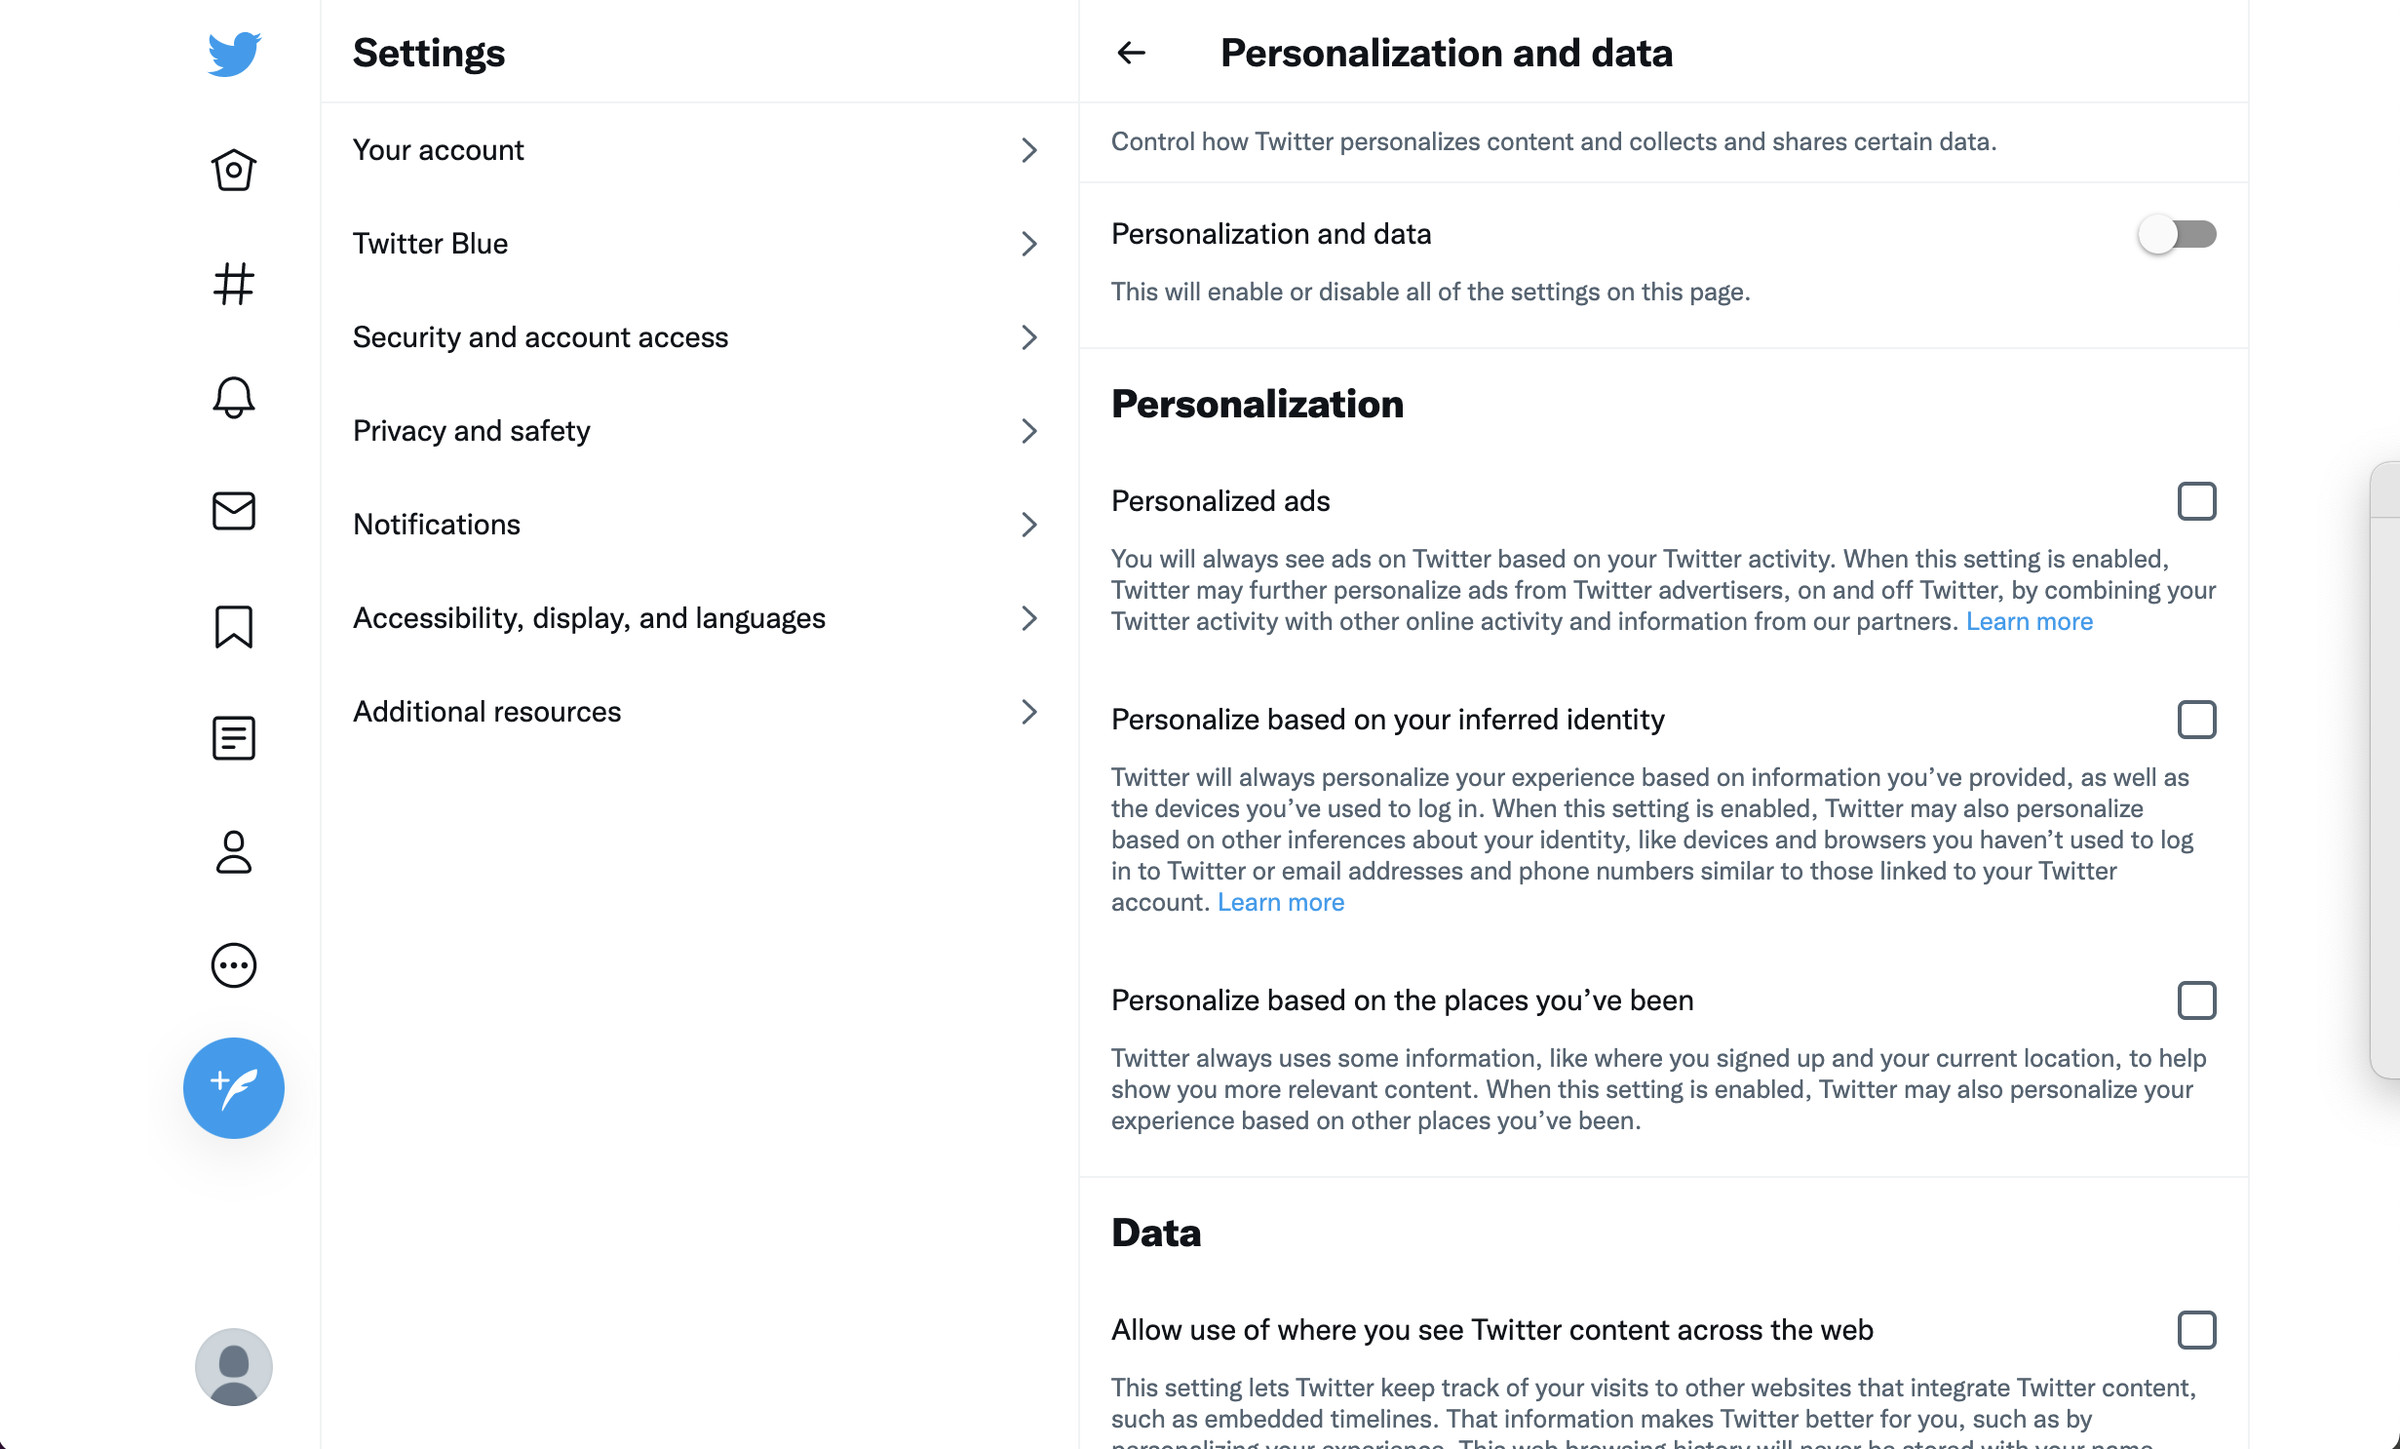 The “Personalization and data” page lets you disable some of the accesses that advertisers have to your data.